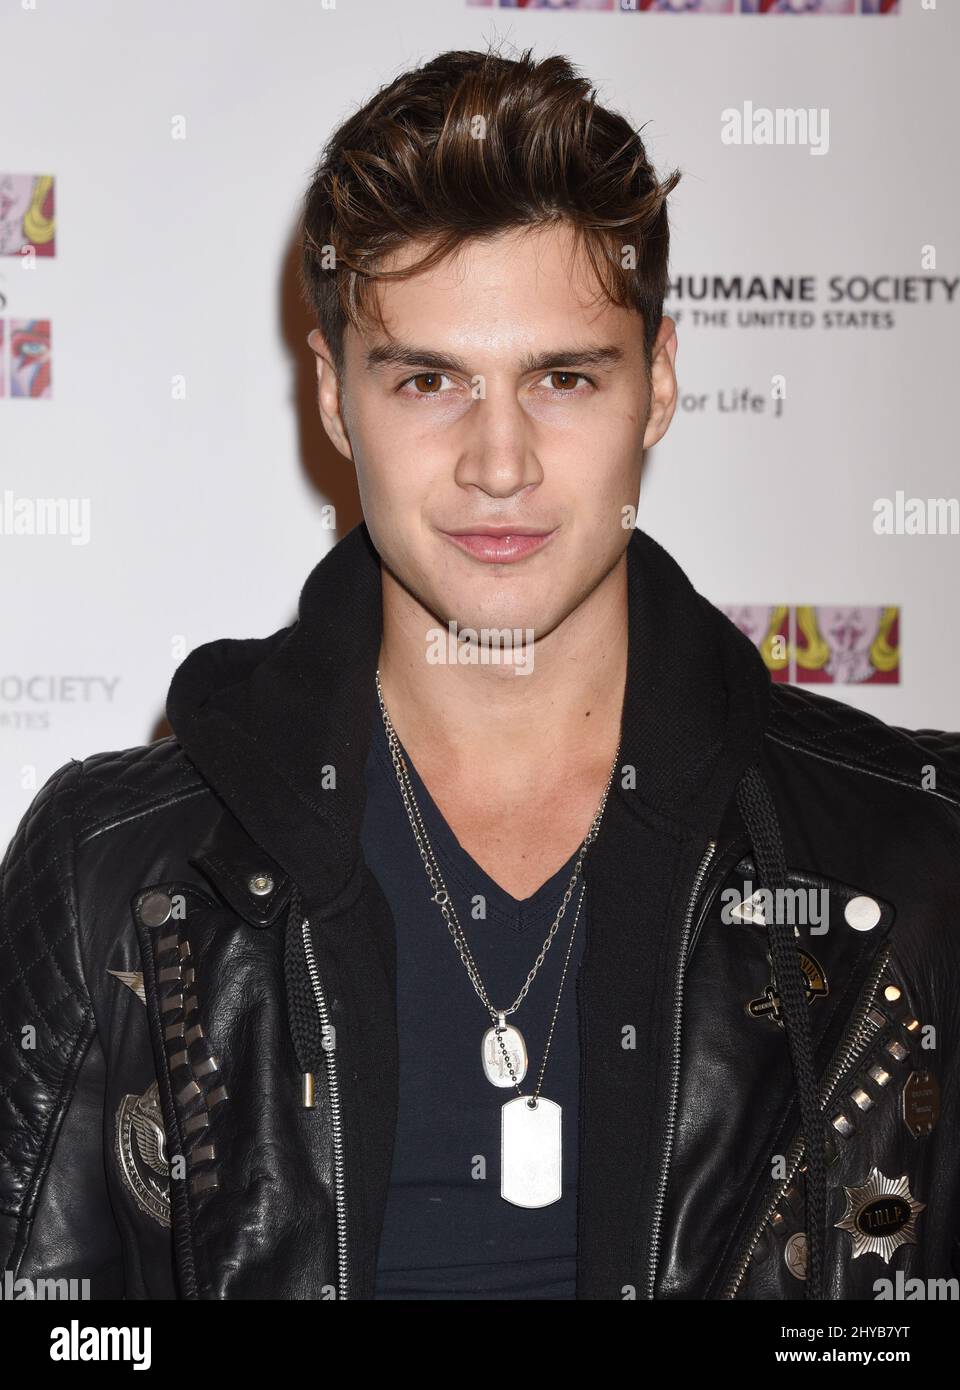 Fede Dorcaz attending the 'SUBCONSCIOUS' by Bria Murphy gallery opening benefitting the Humane Society held at the LACE Gallery in Los Angeles, USA. Stock Photo